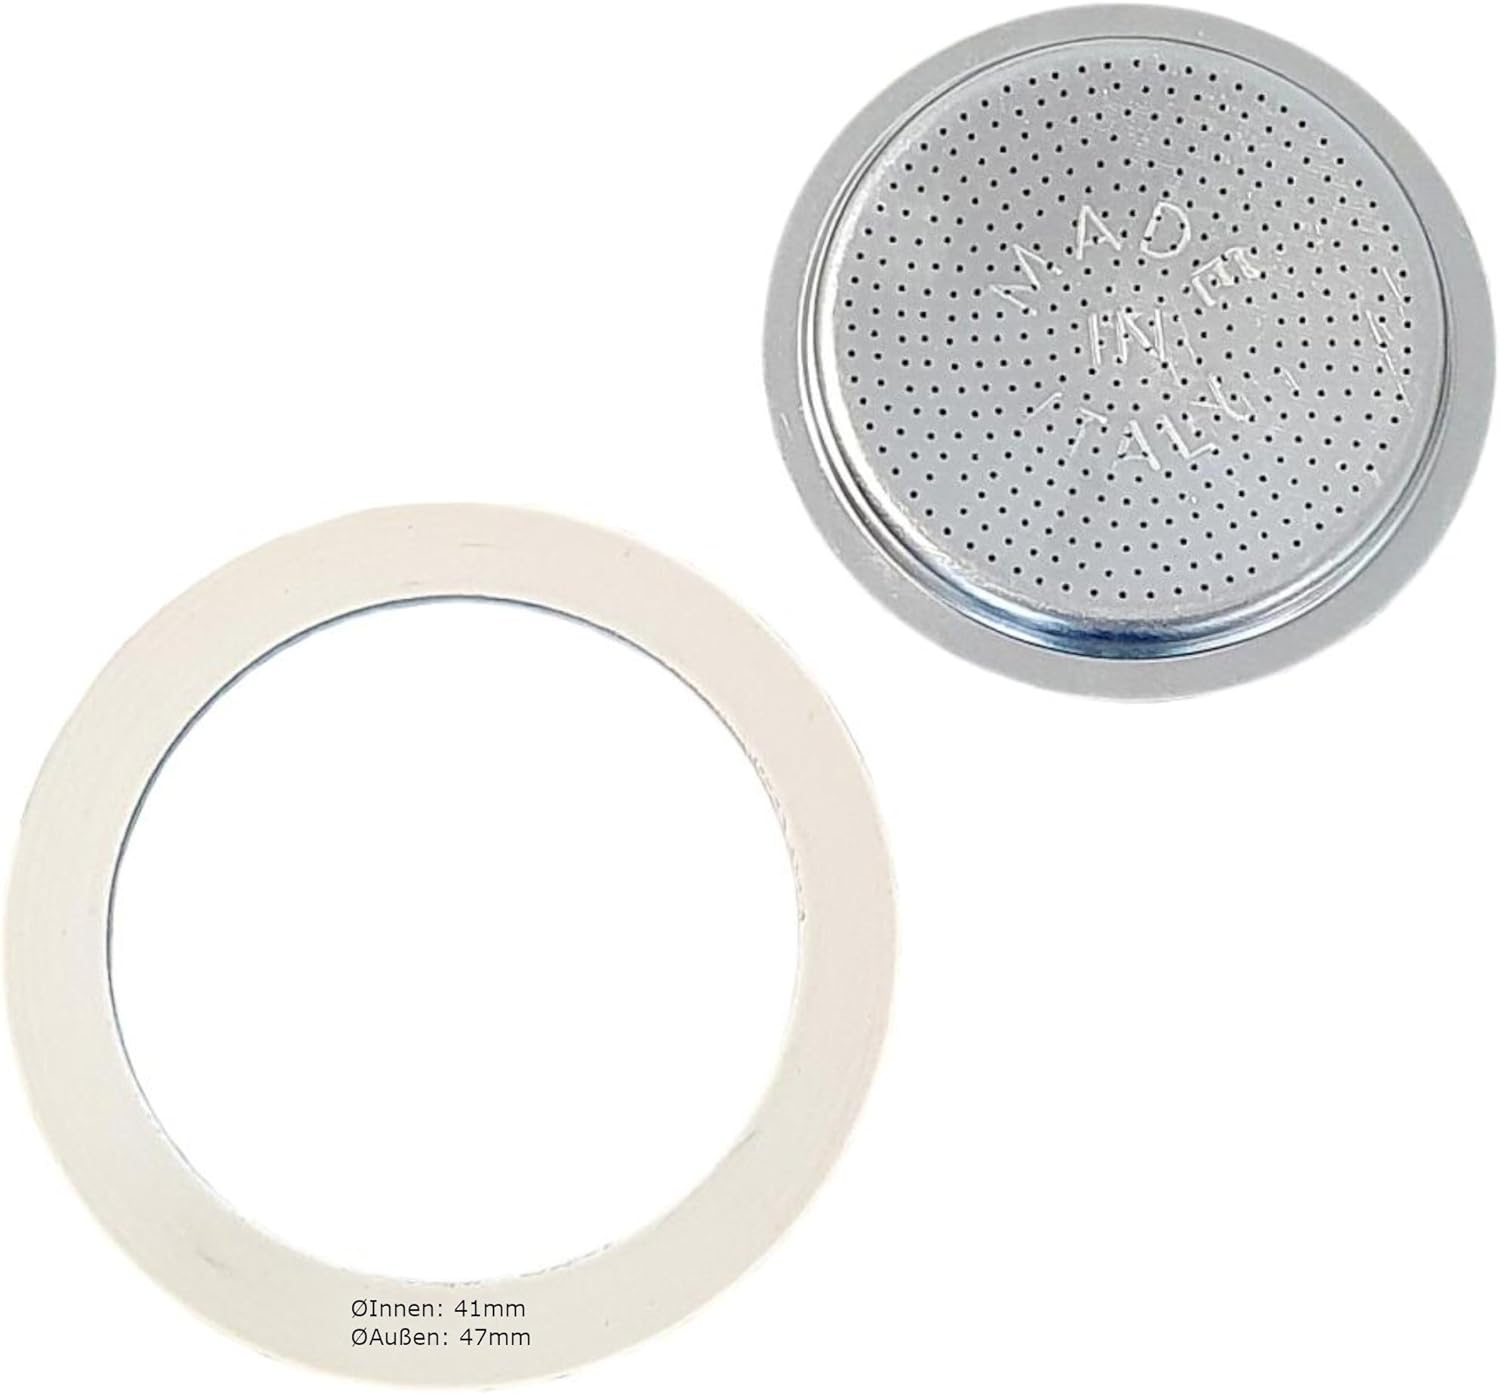 Harren24 Filter and Seal for Espresso Maker, Compatible with Bialetti Espresso Pot for 1 Cup, Outer Diameter 47 mm, 4.7 cm, inner diameter 41 mm, 4.1 cm, replacement Seal, Sealing Ring